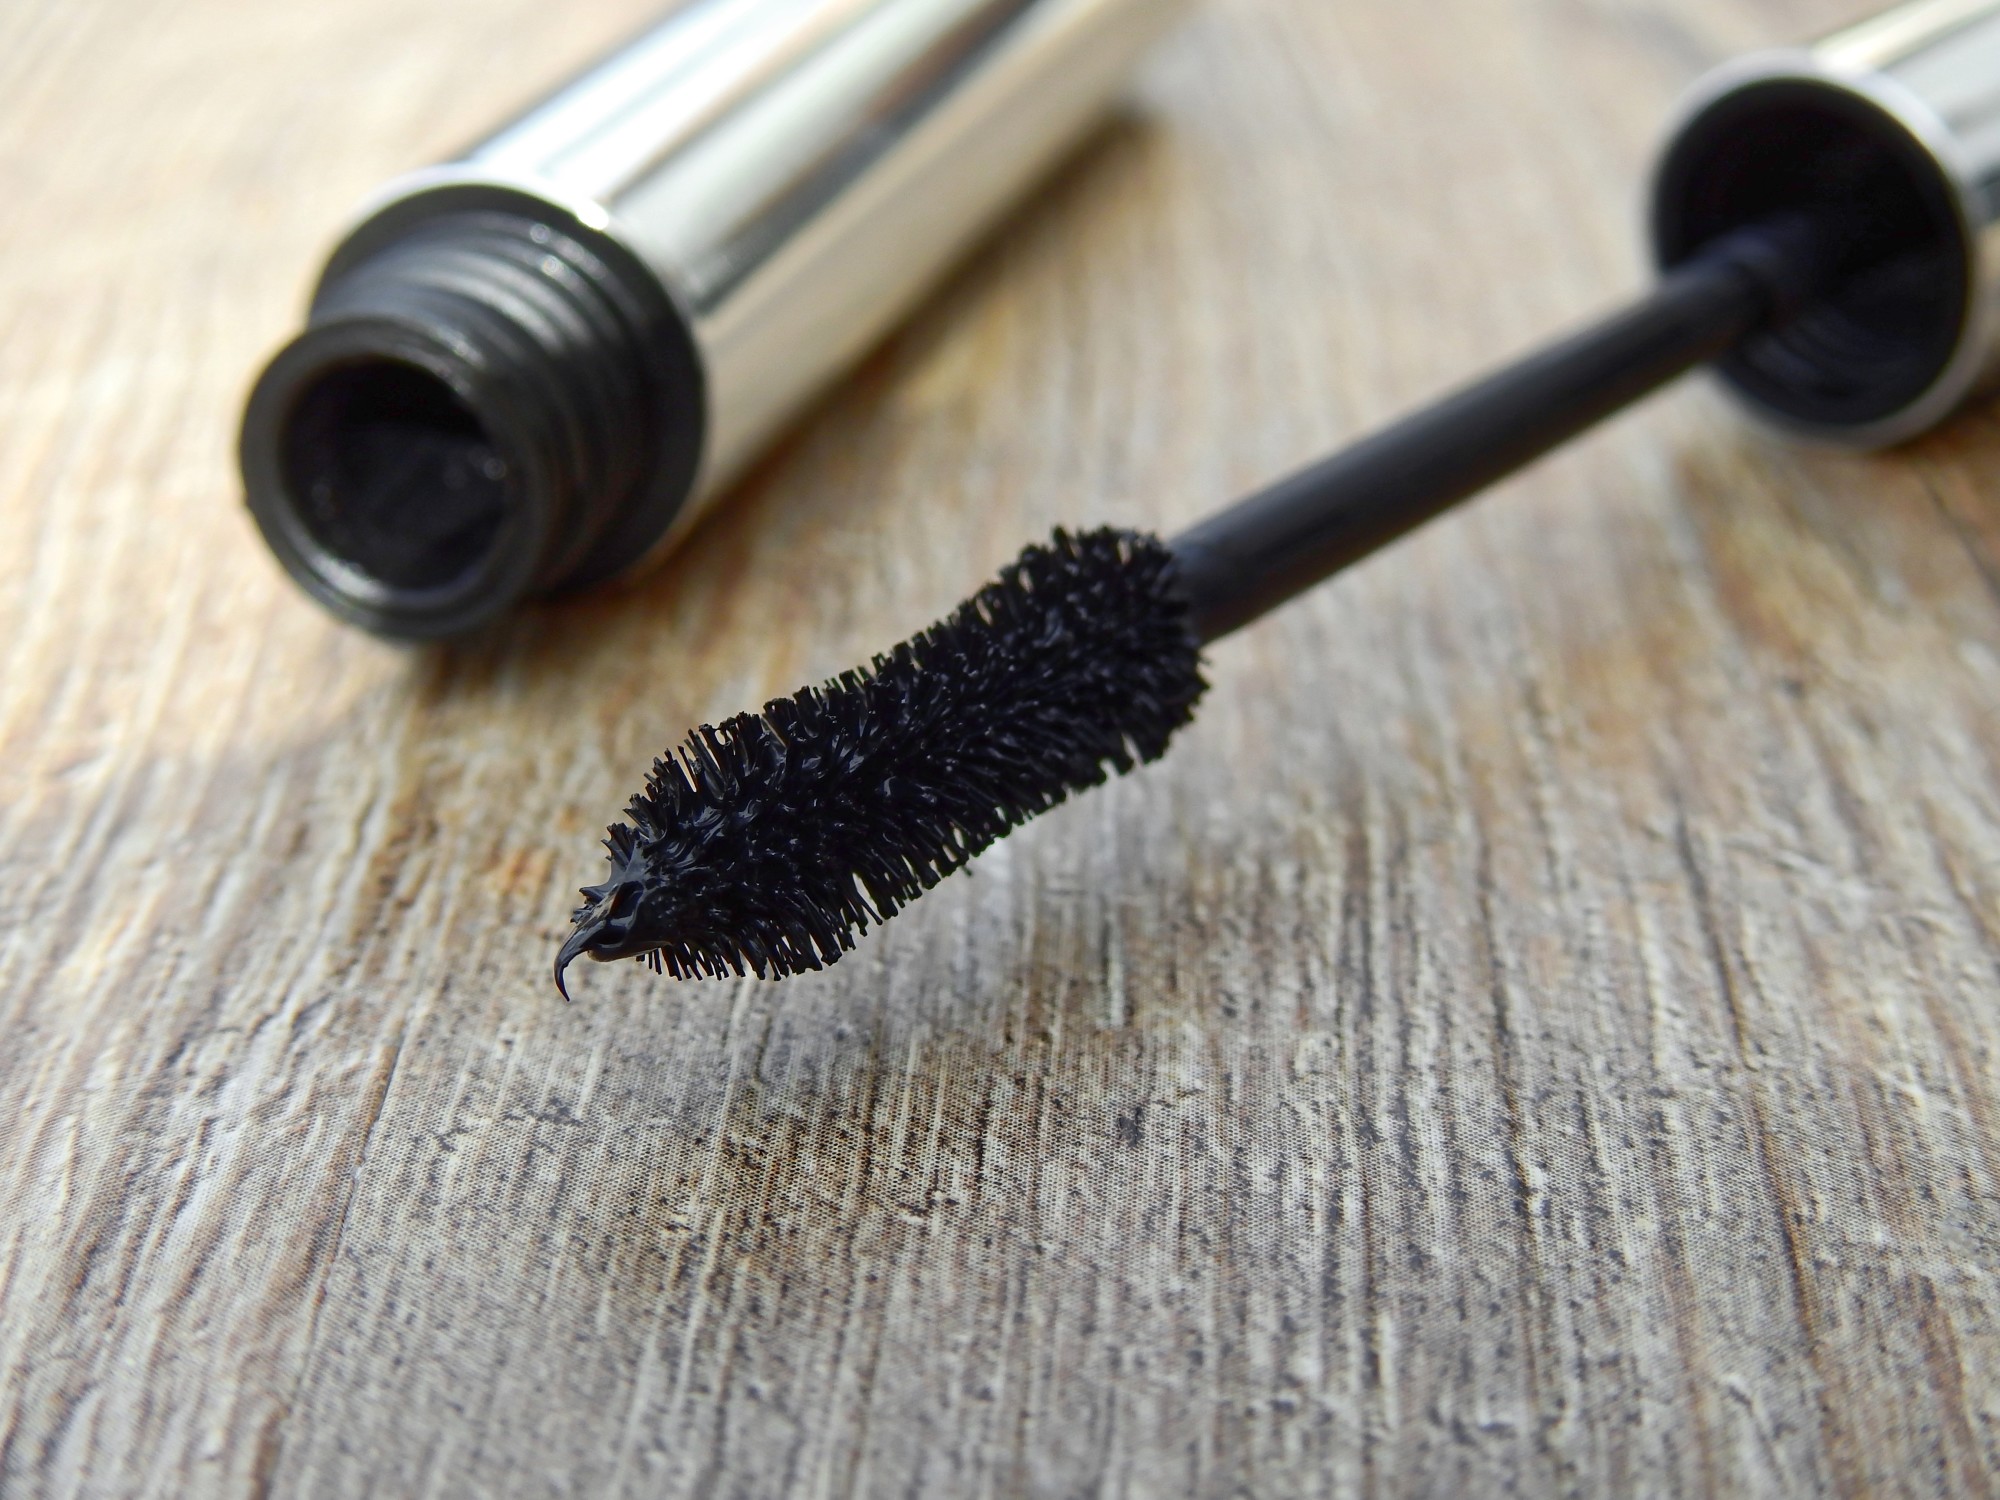 11 Super Helpful Mascara Tips to Make Your Lashes Look Stunning